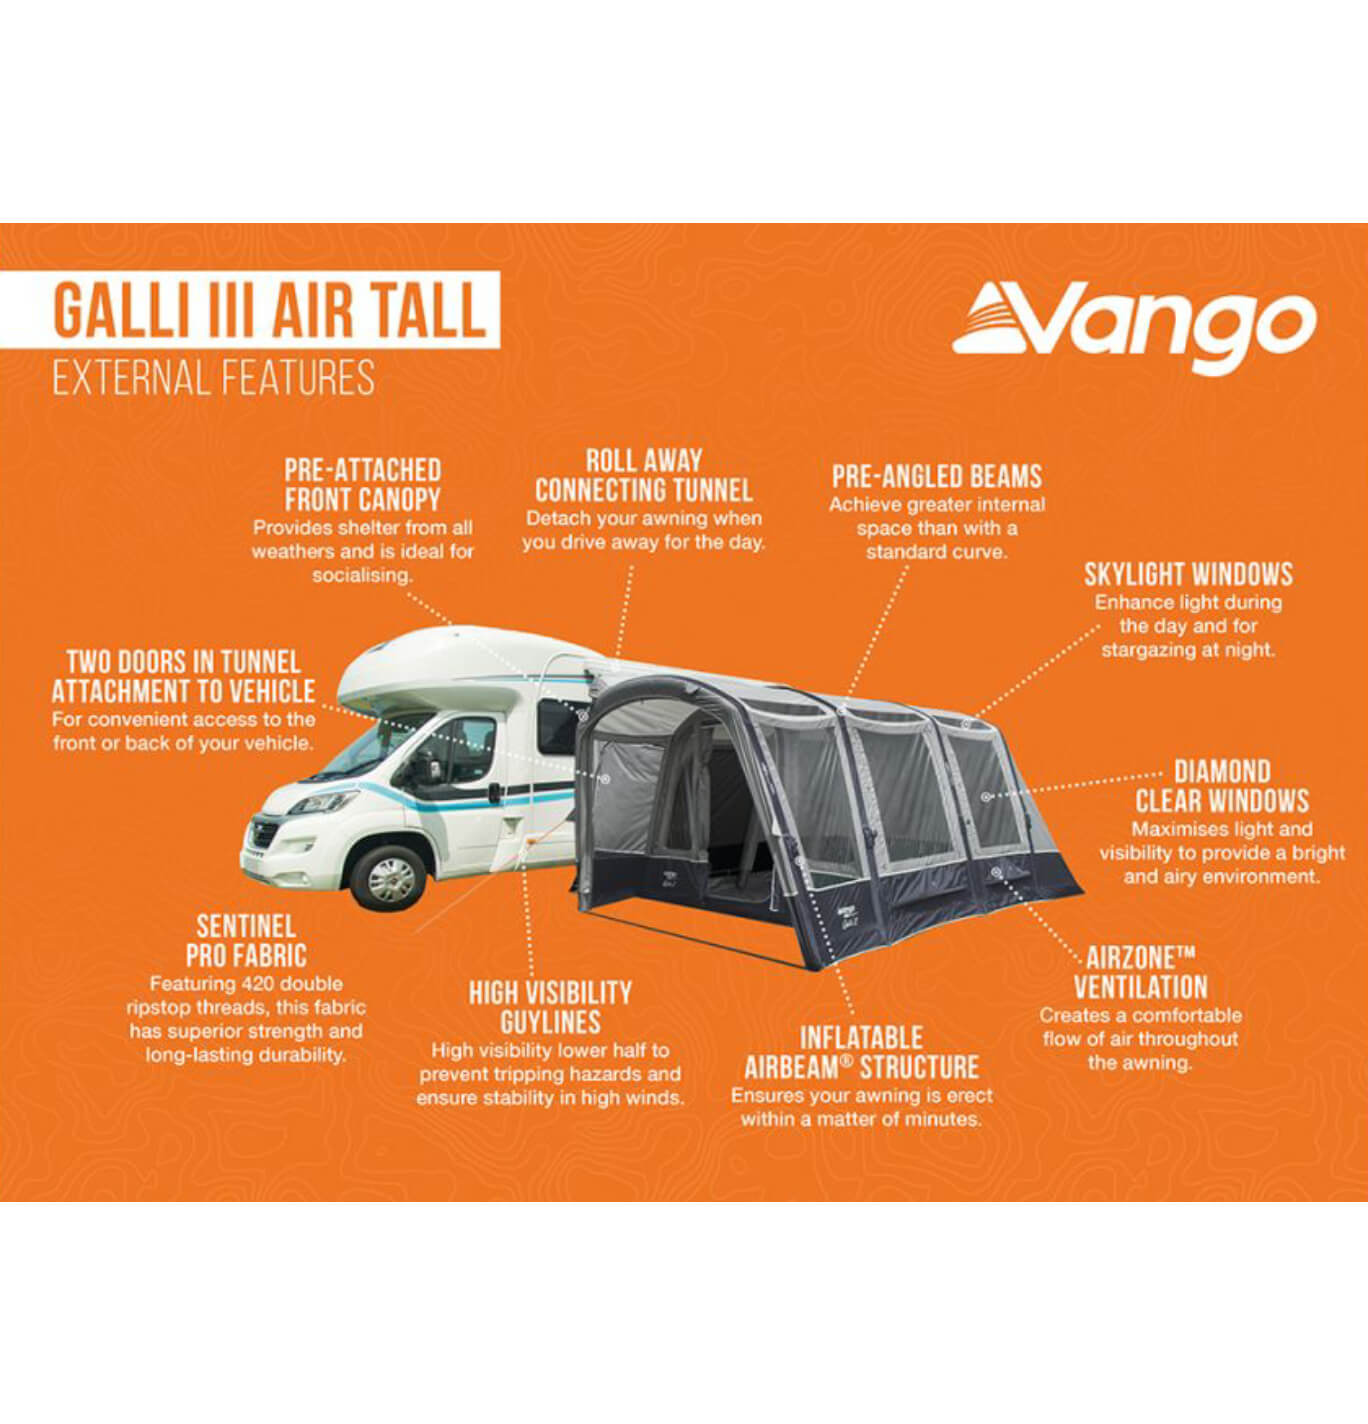 Features of the Galli drive away awning